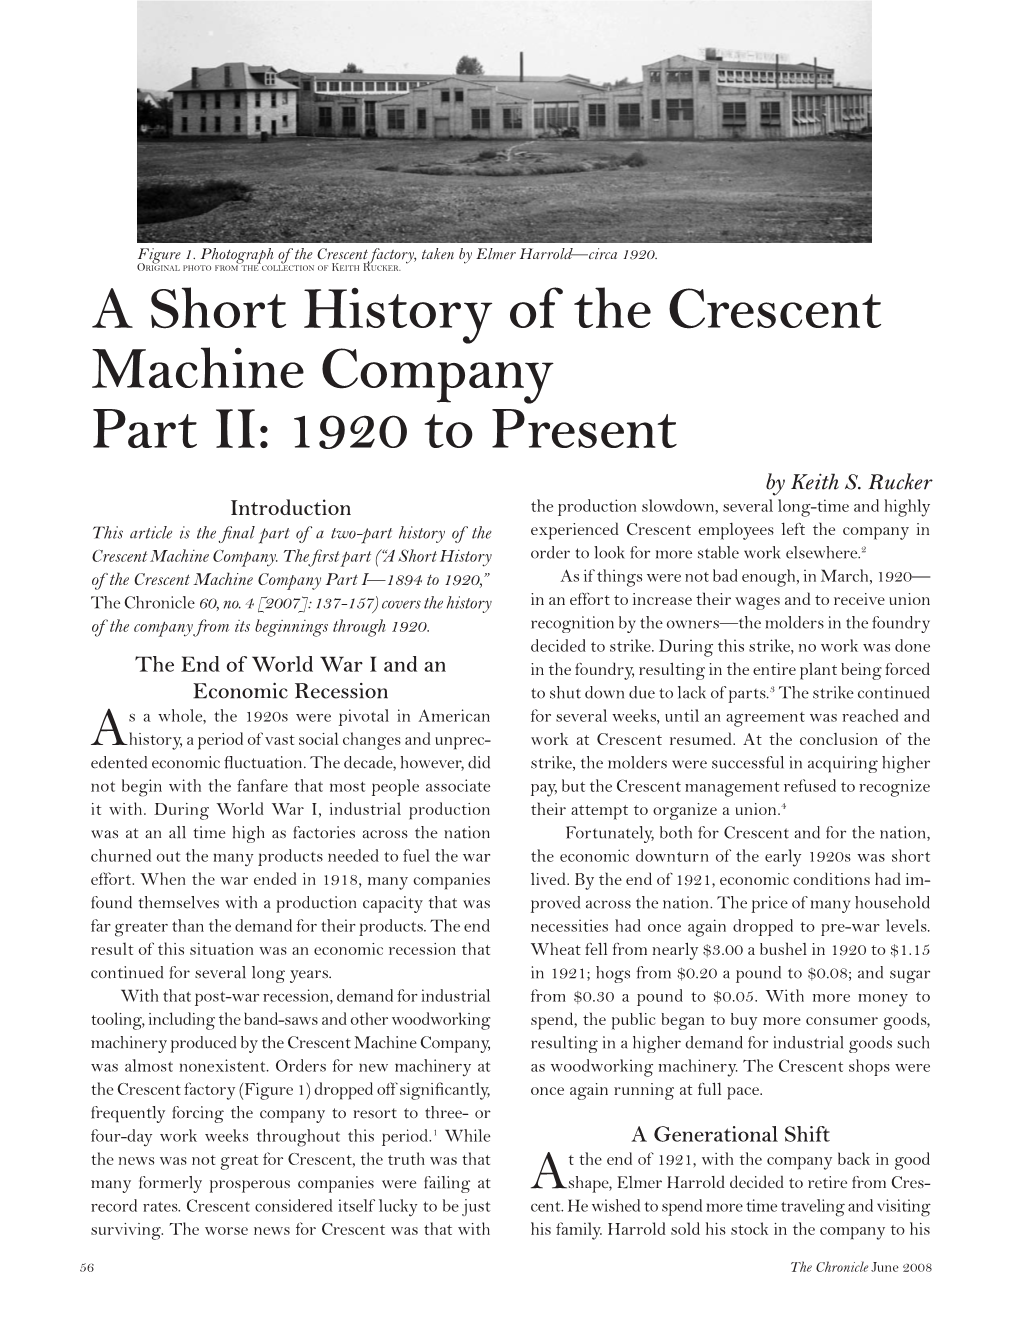 A Short History of the Crescent Machine Company Part II: 1920 to Present by Keith S